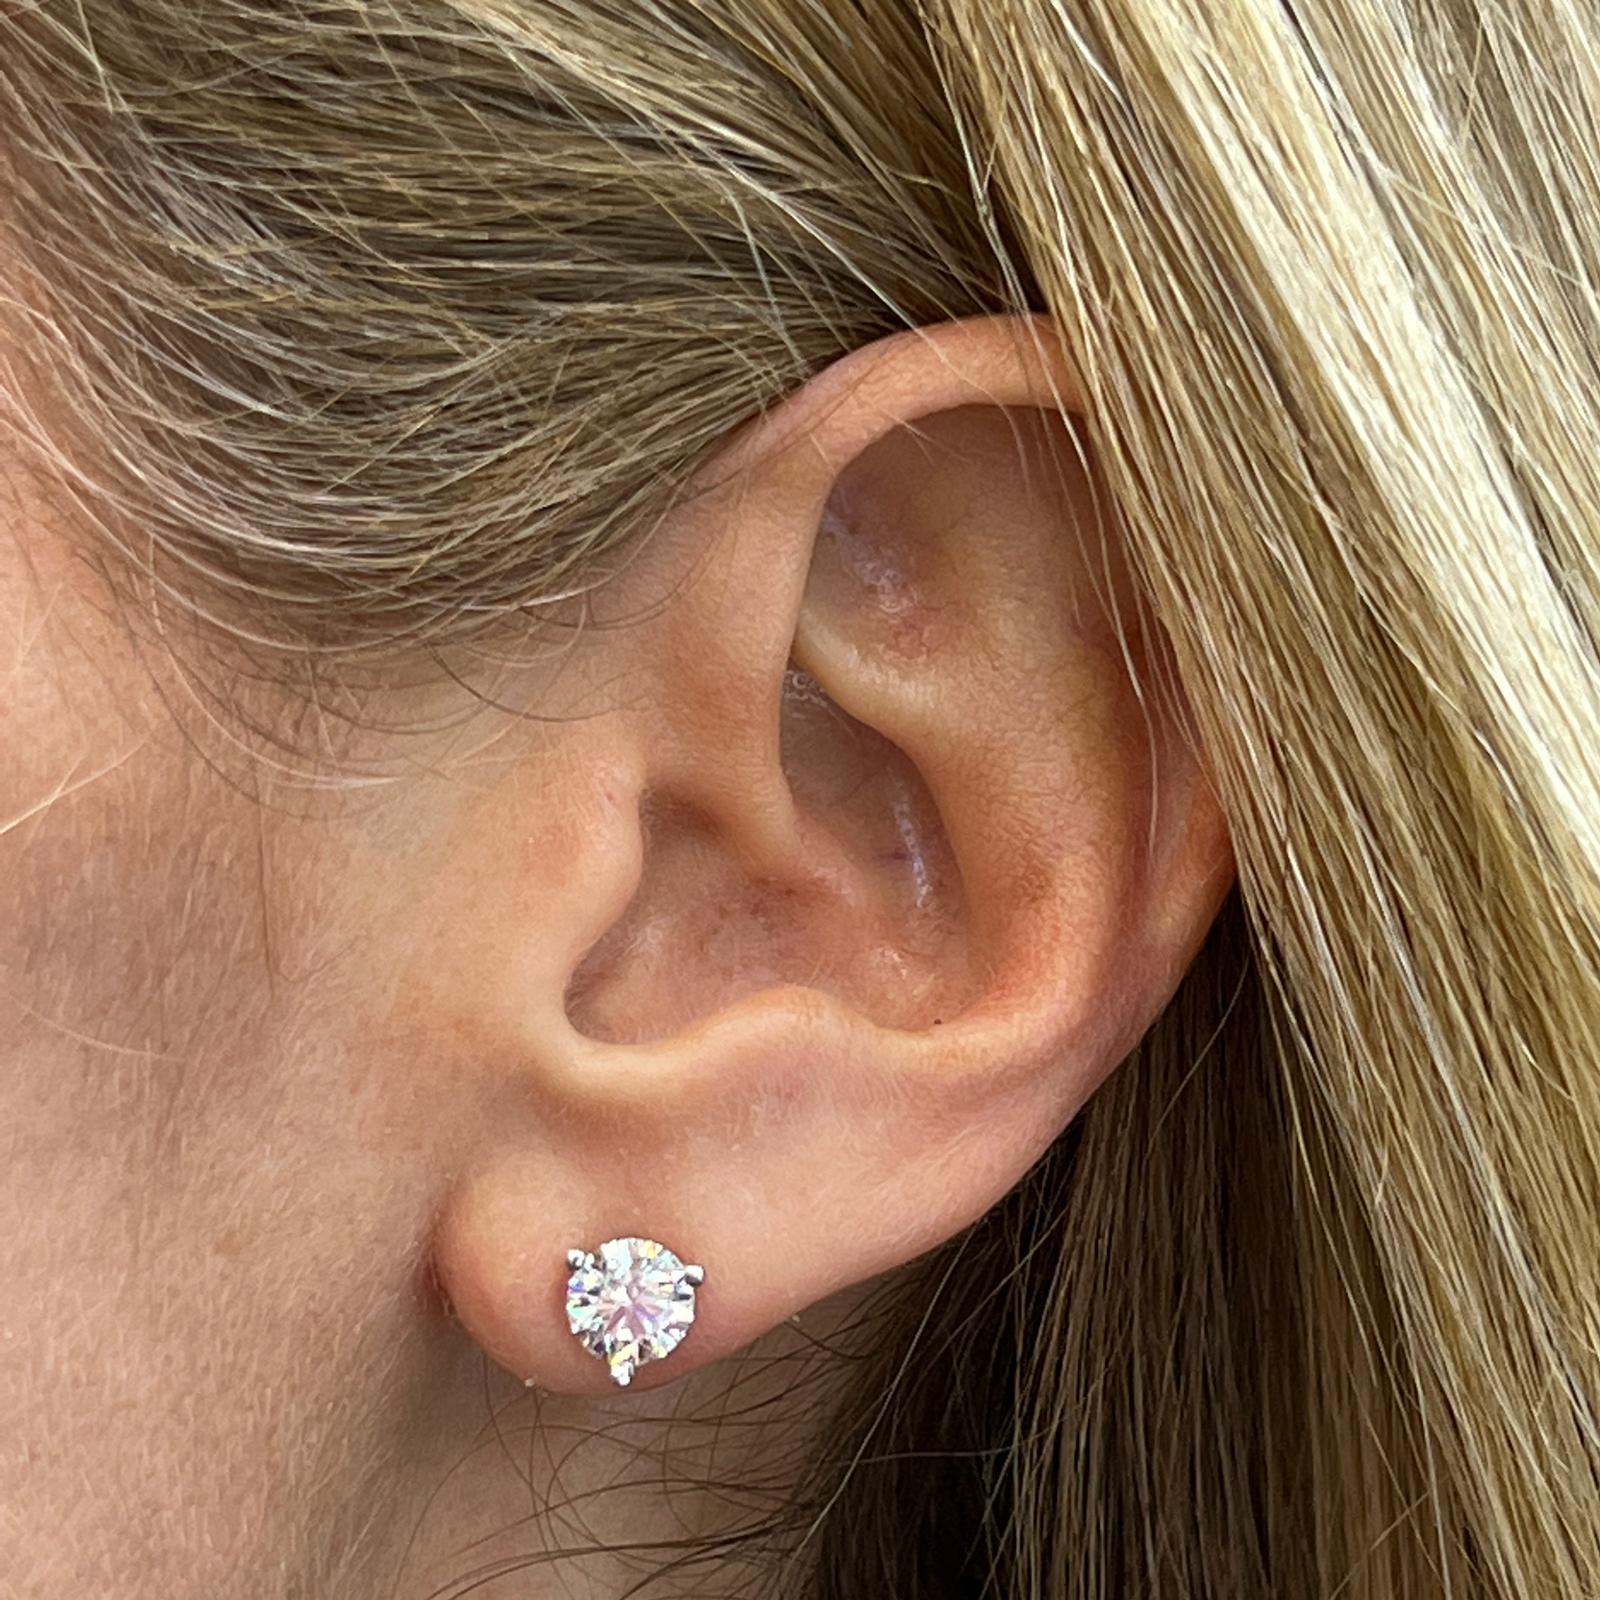 2.01 Carat total weight diamond stud earrings set in 3 prong martini 14 karat white gold mountings. The round brilliant diamonds are GIA certified E color, SI1 clarity, and triple excellent cut, polish, and symmetry. 